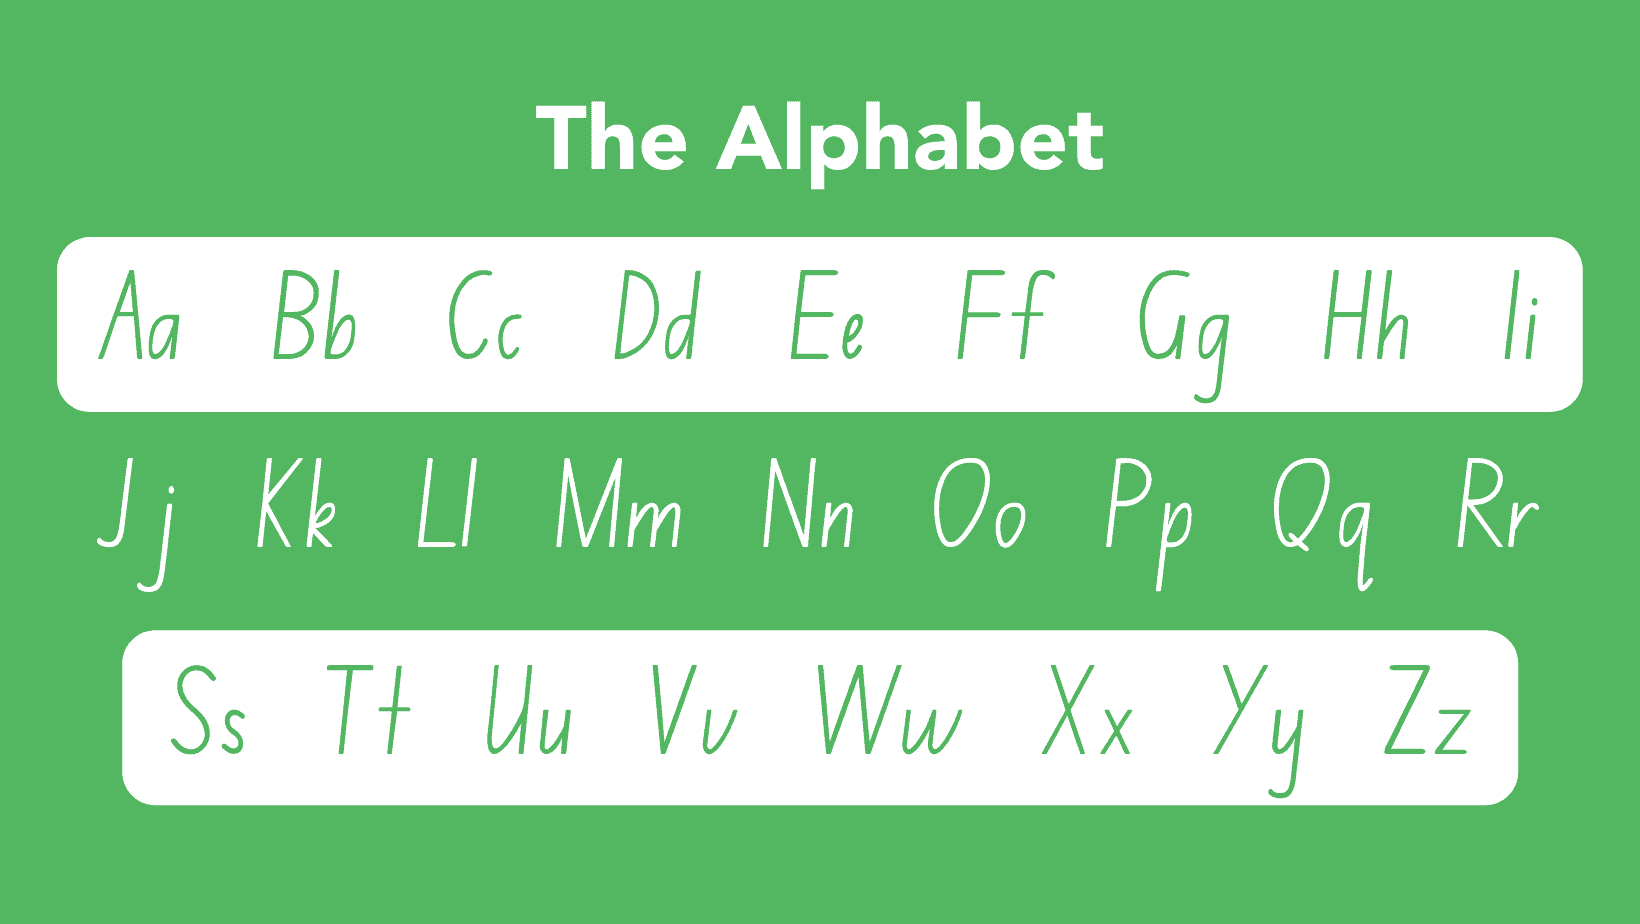 3 Easy Strategies to Implement for Learning the Alphabet